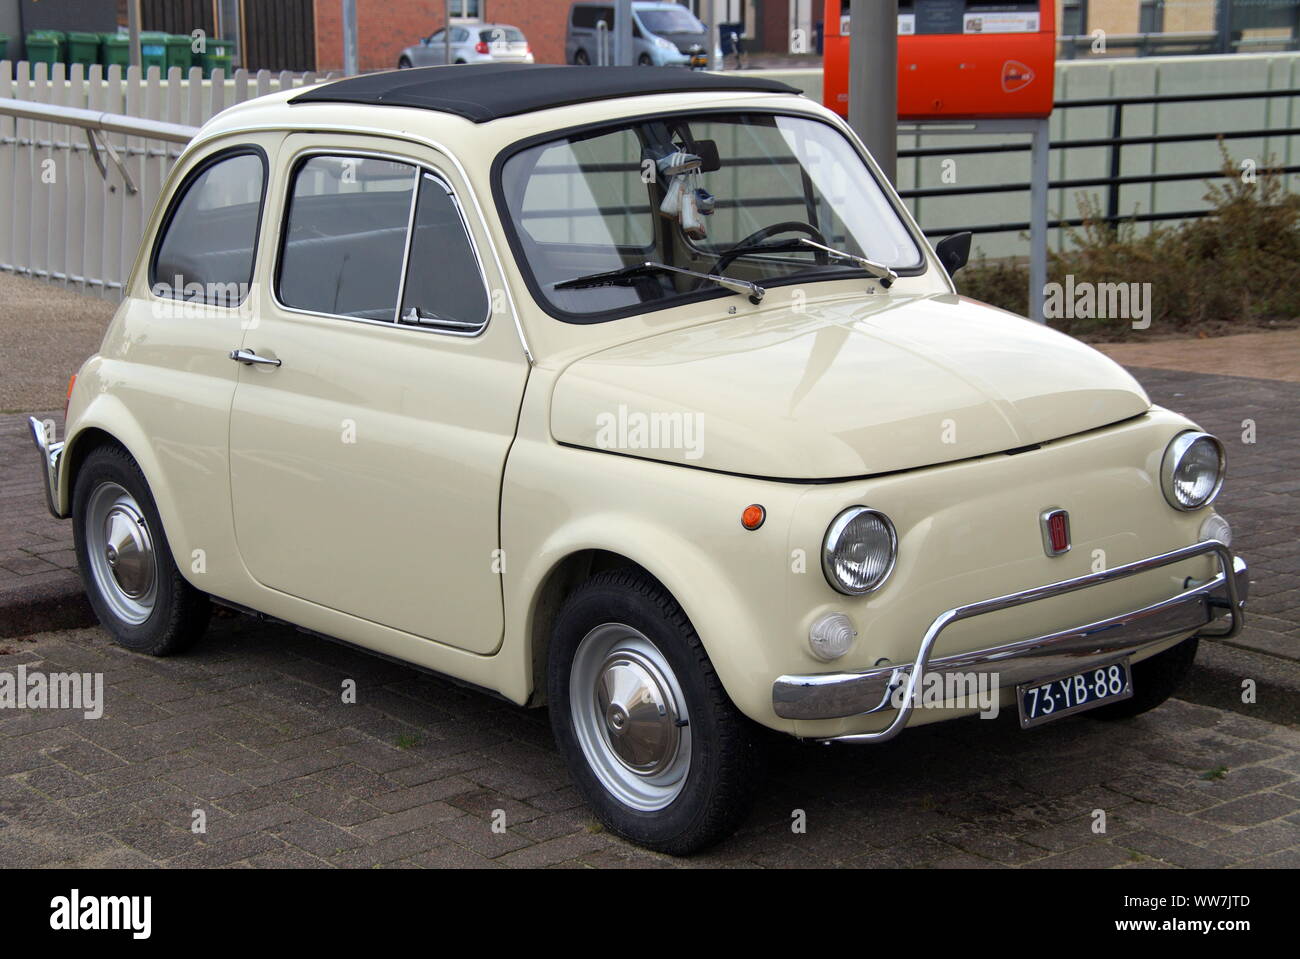 Almere, Flevoland, The Netherlands - November 14, 2014: Beige Fiat 500 parked in a public parking lot. Stock Photo